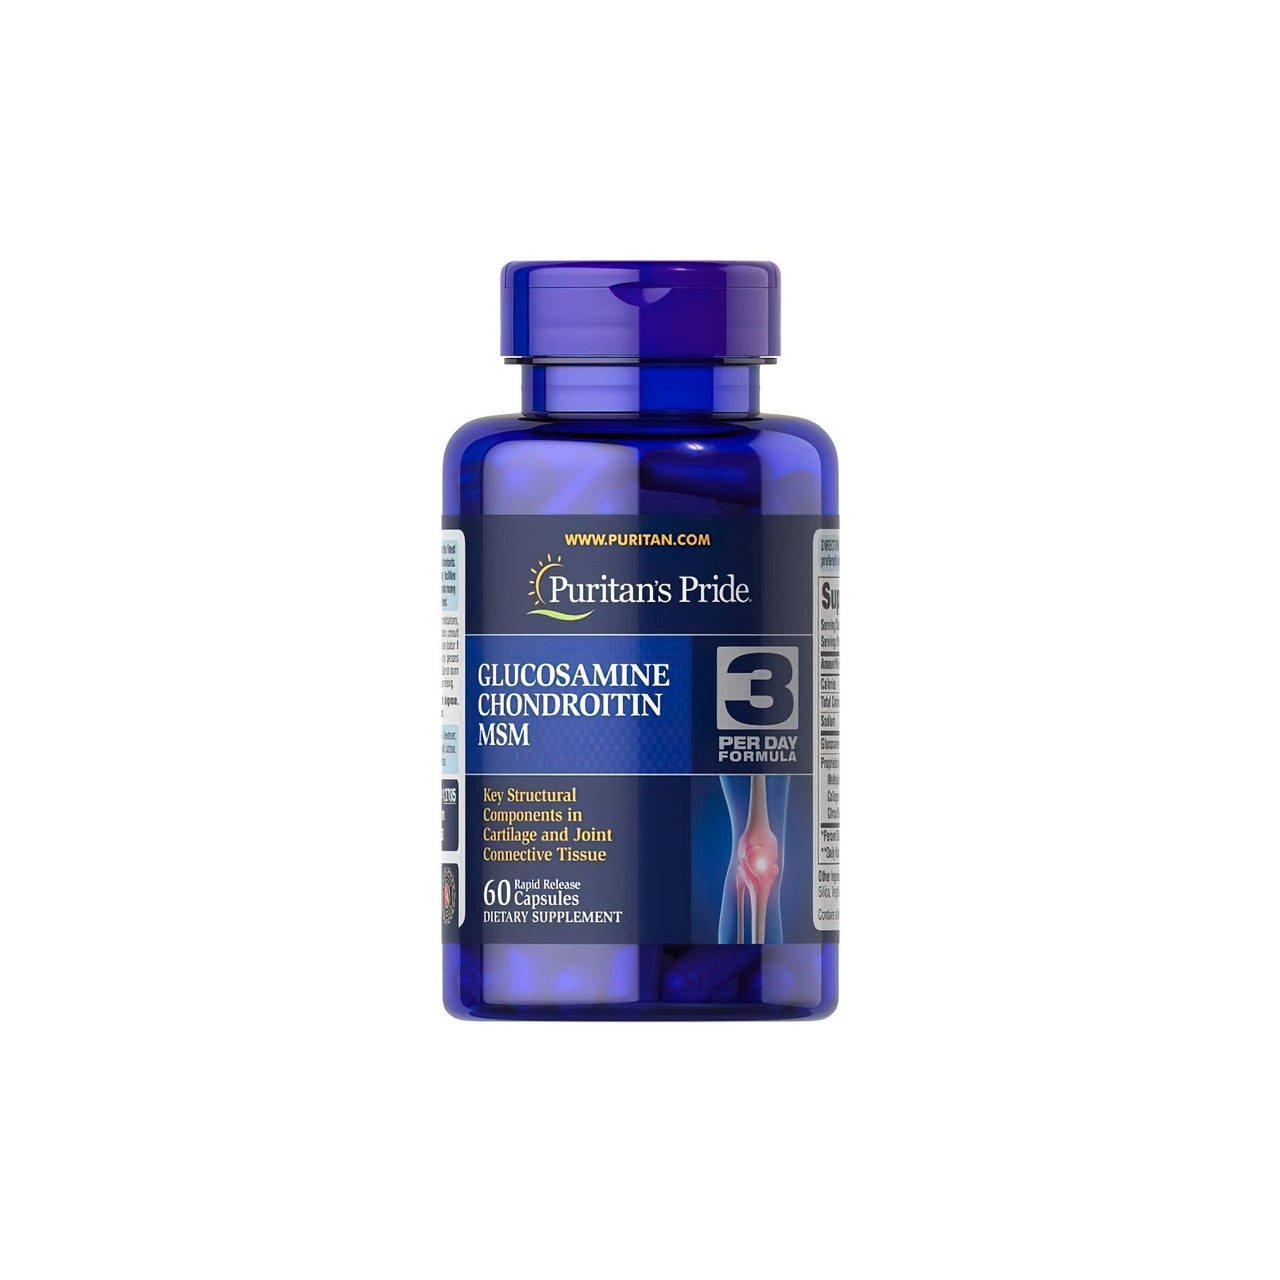 A bottle of Glucosamine Chondroitin MSM 60 capsules by Puritan's Pride.